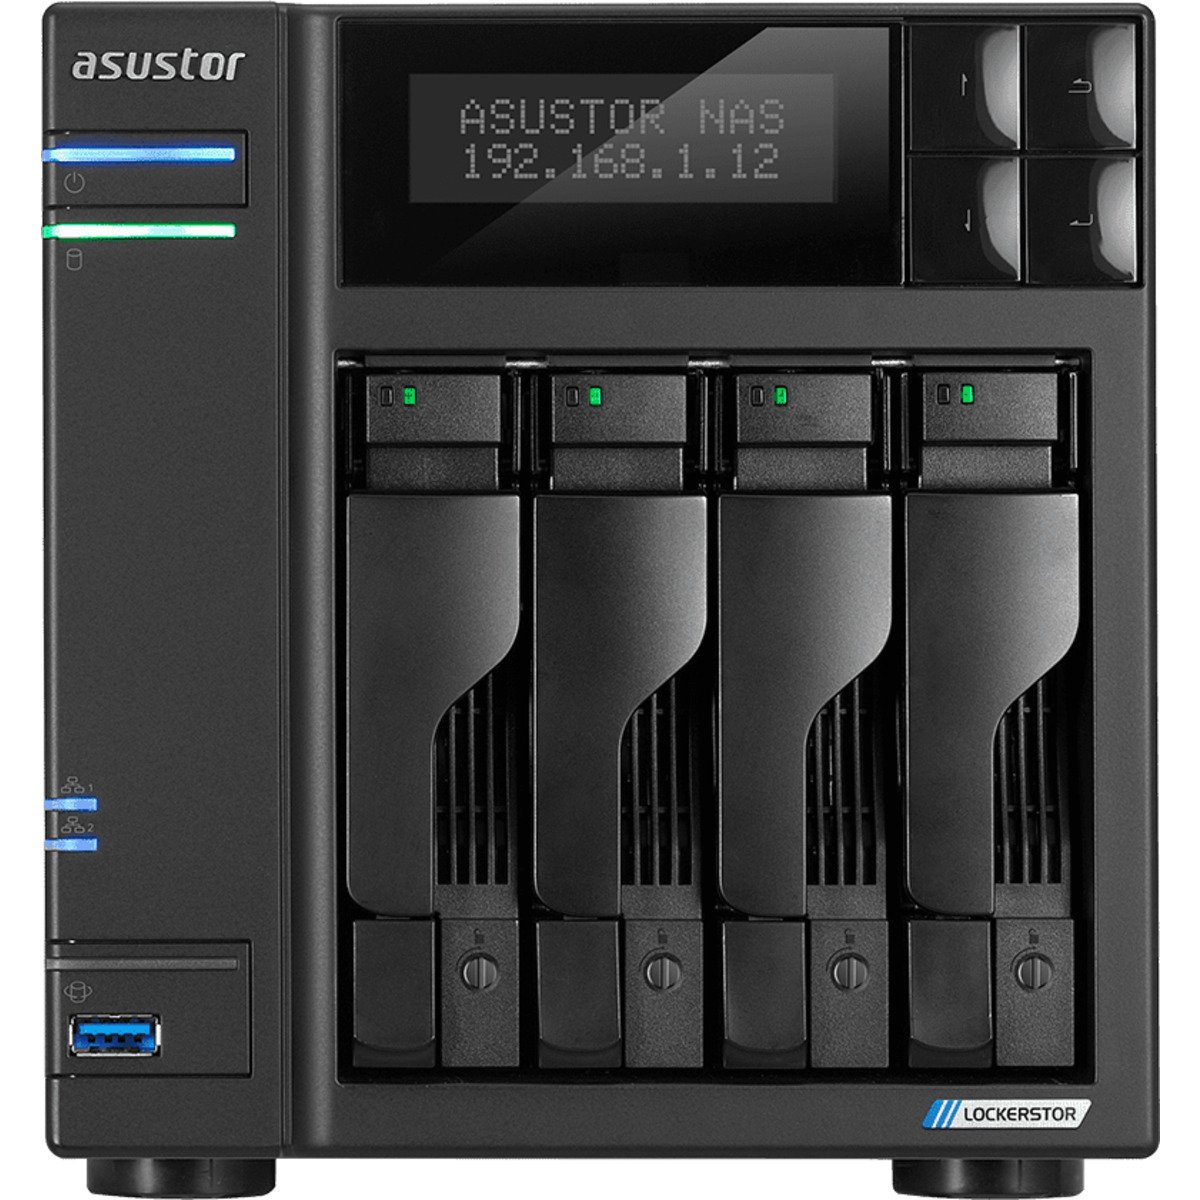 ASUSTOR AS6604T Lockerstor 4 8tb 4-Bay Desktop Multimedia / Power User / Business NAS - Network Attached Storage Device 4x2tb Sandisk Ultra 3D SDSSDH3-2T00 2.5 560/520MB/s SATA 6Gb/s SSD CONSUMER Class Drives Installed - Burn-In Tested - FREE RAM UPGRADE AS6604T Lockerstor 4